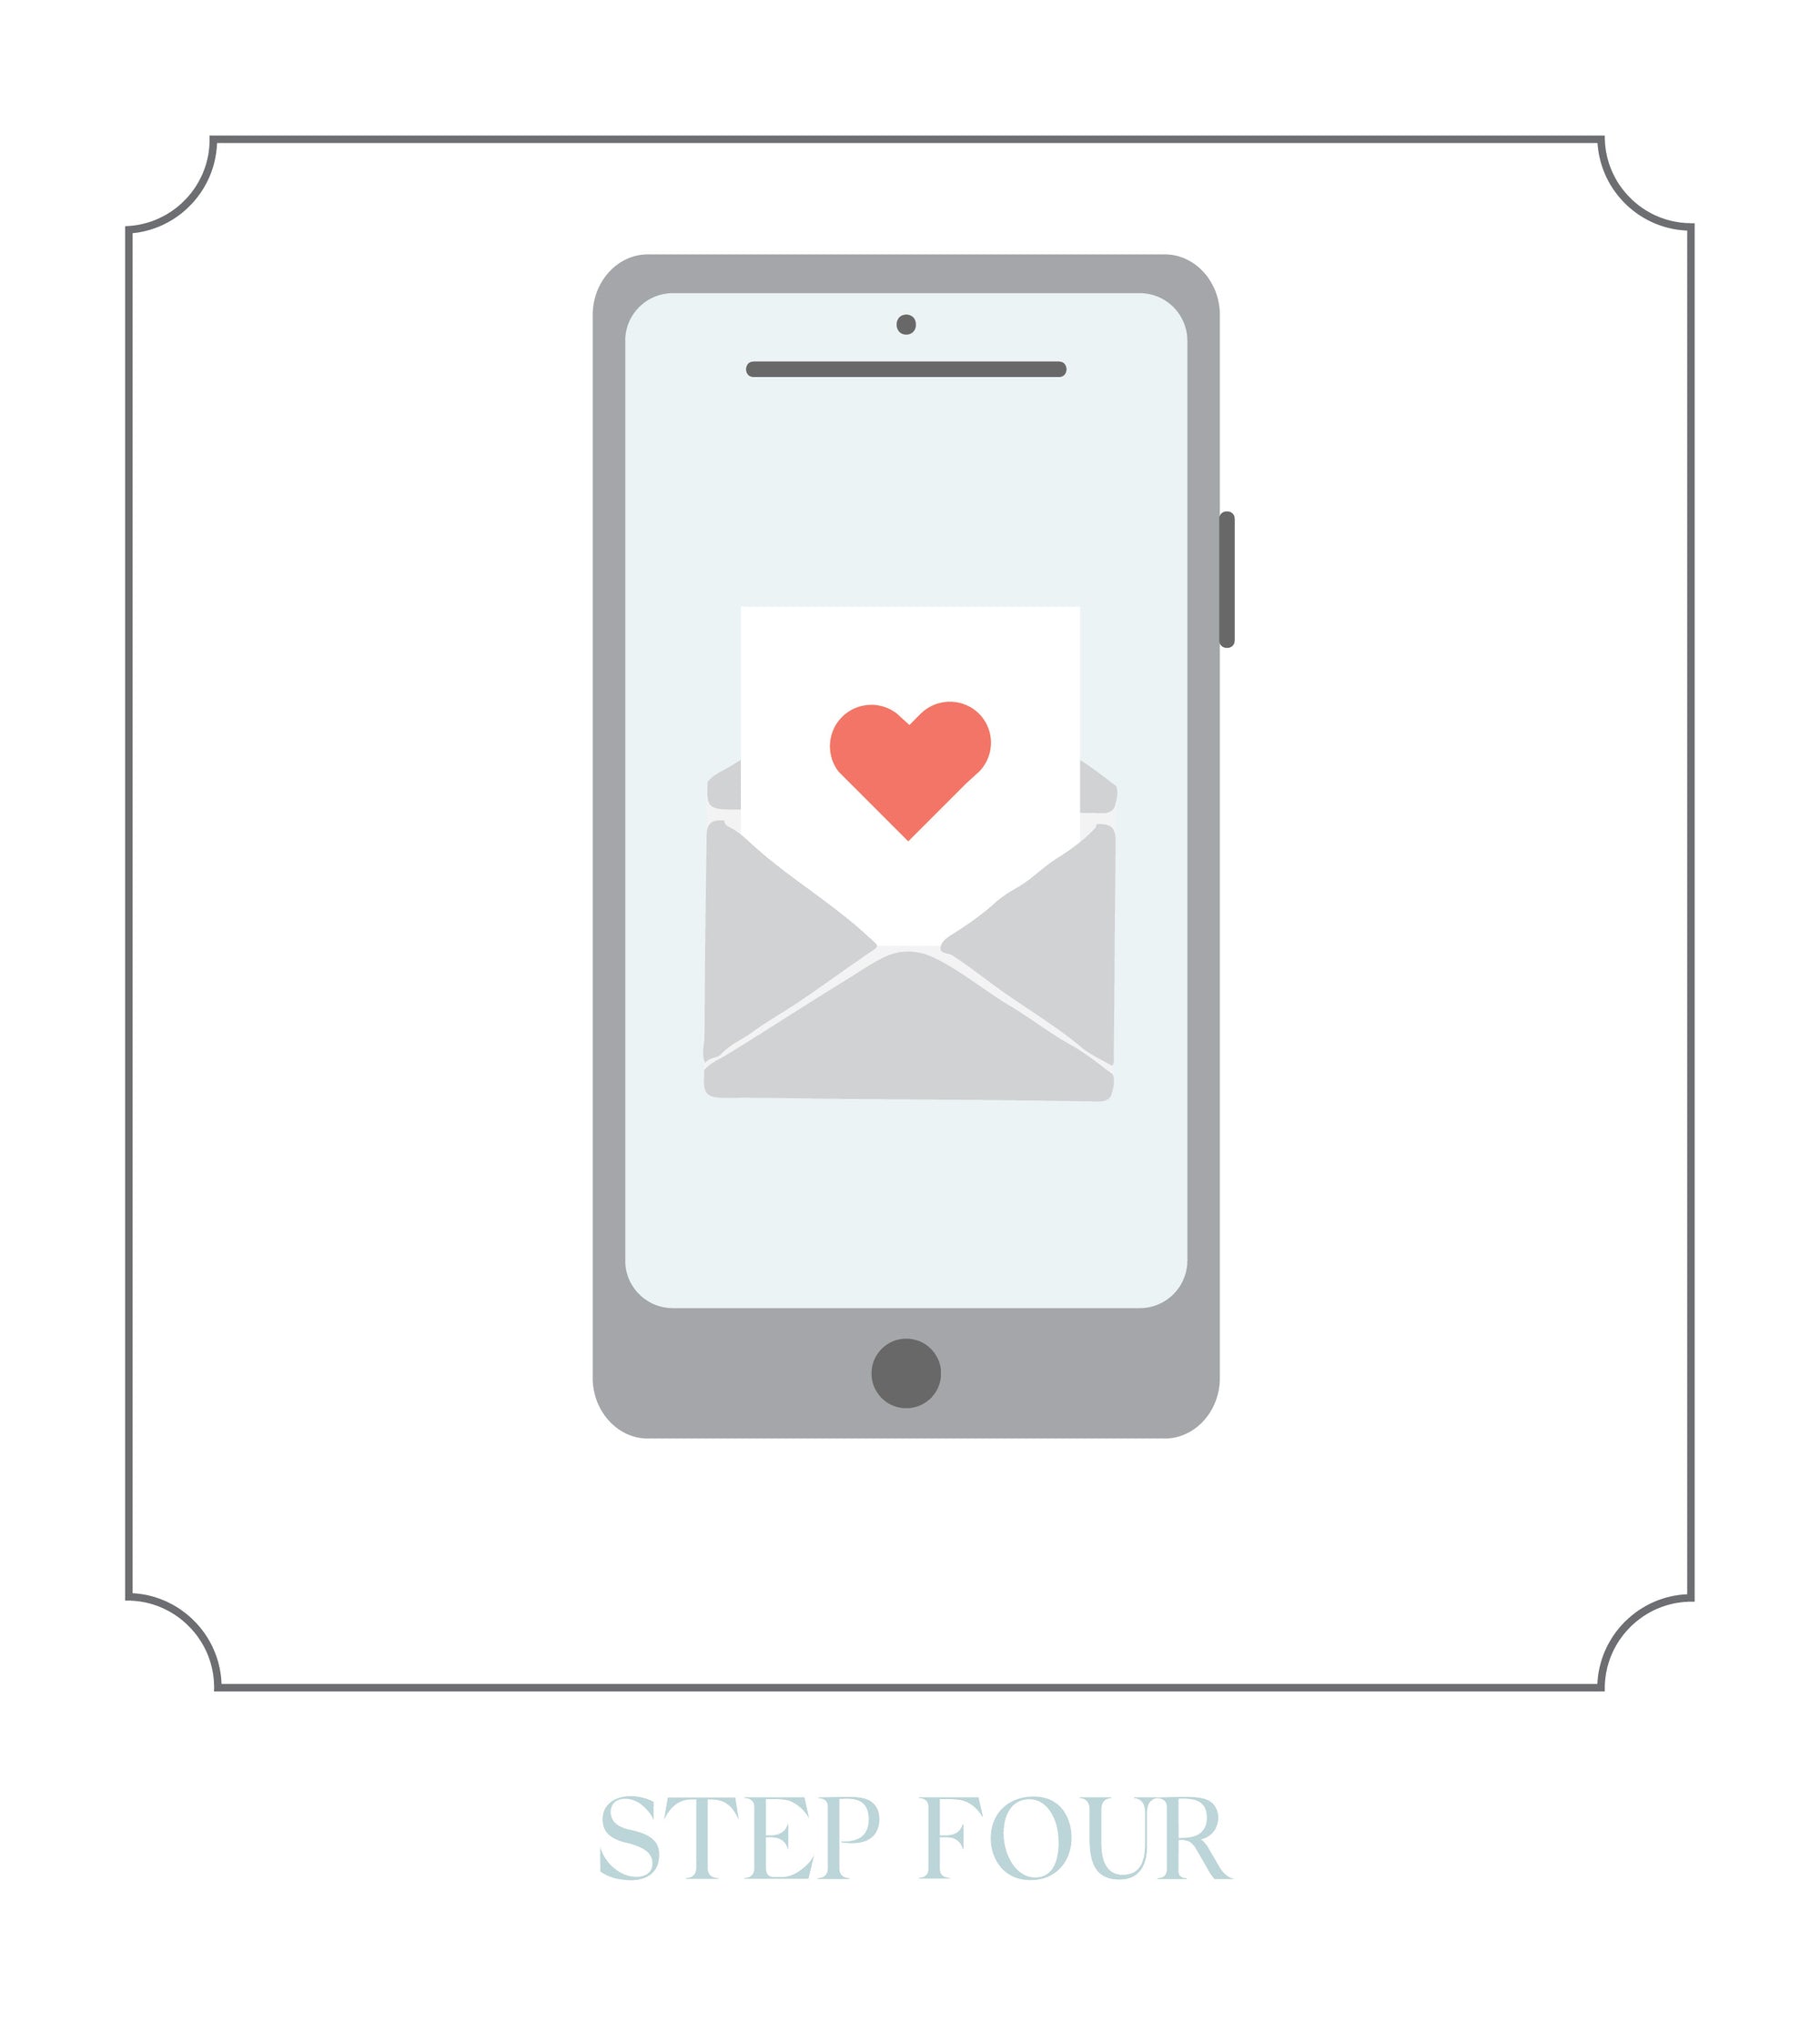 Illustration of a phone with icons of a letter and a heart. Below it says Step Four.